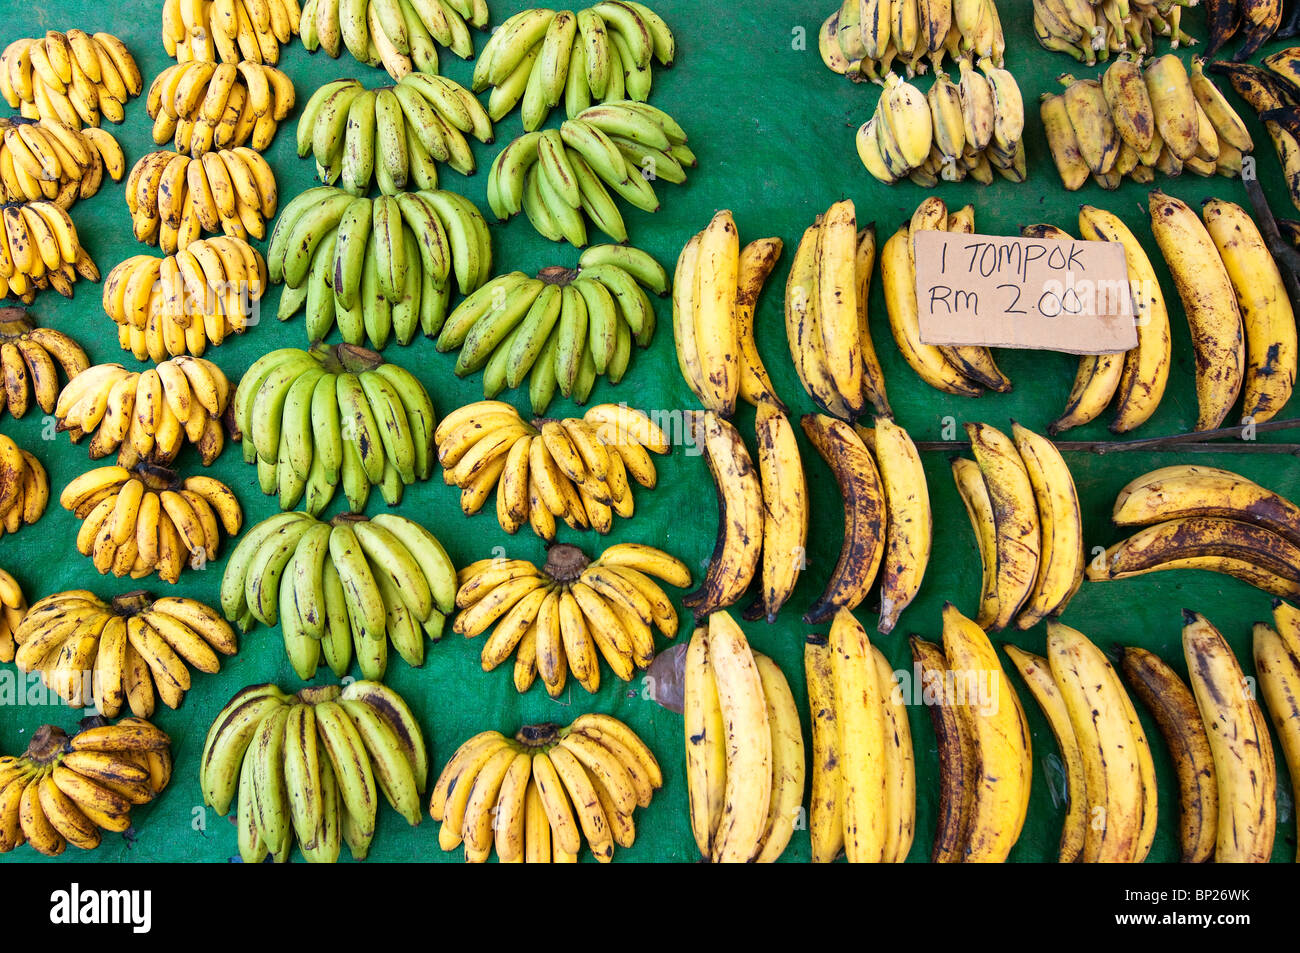 Different types of bananas for sale in the Weekend Market on Jalan Santok in Kuching, Borneo Stock Photo